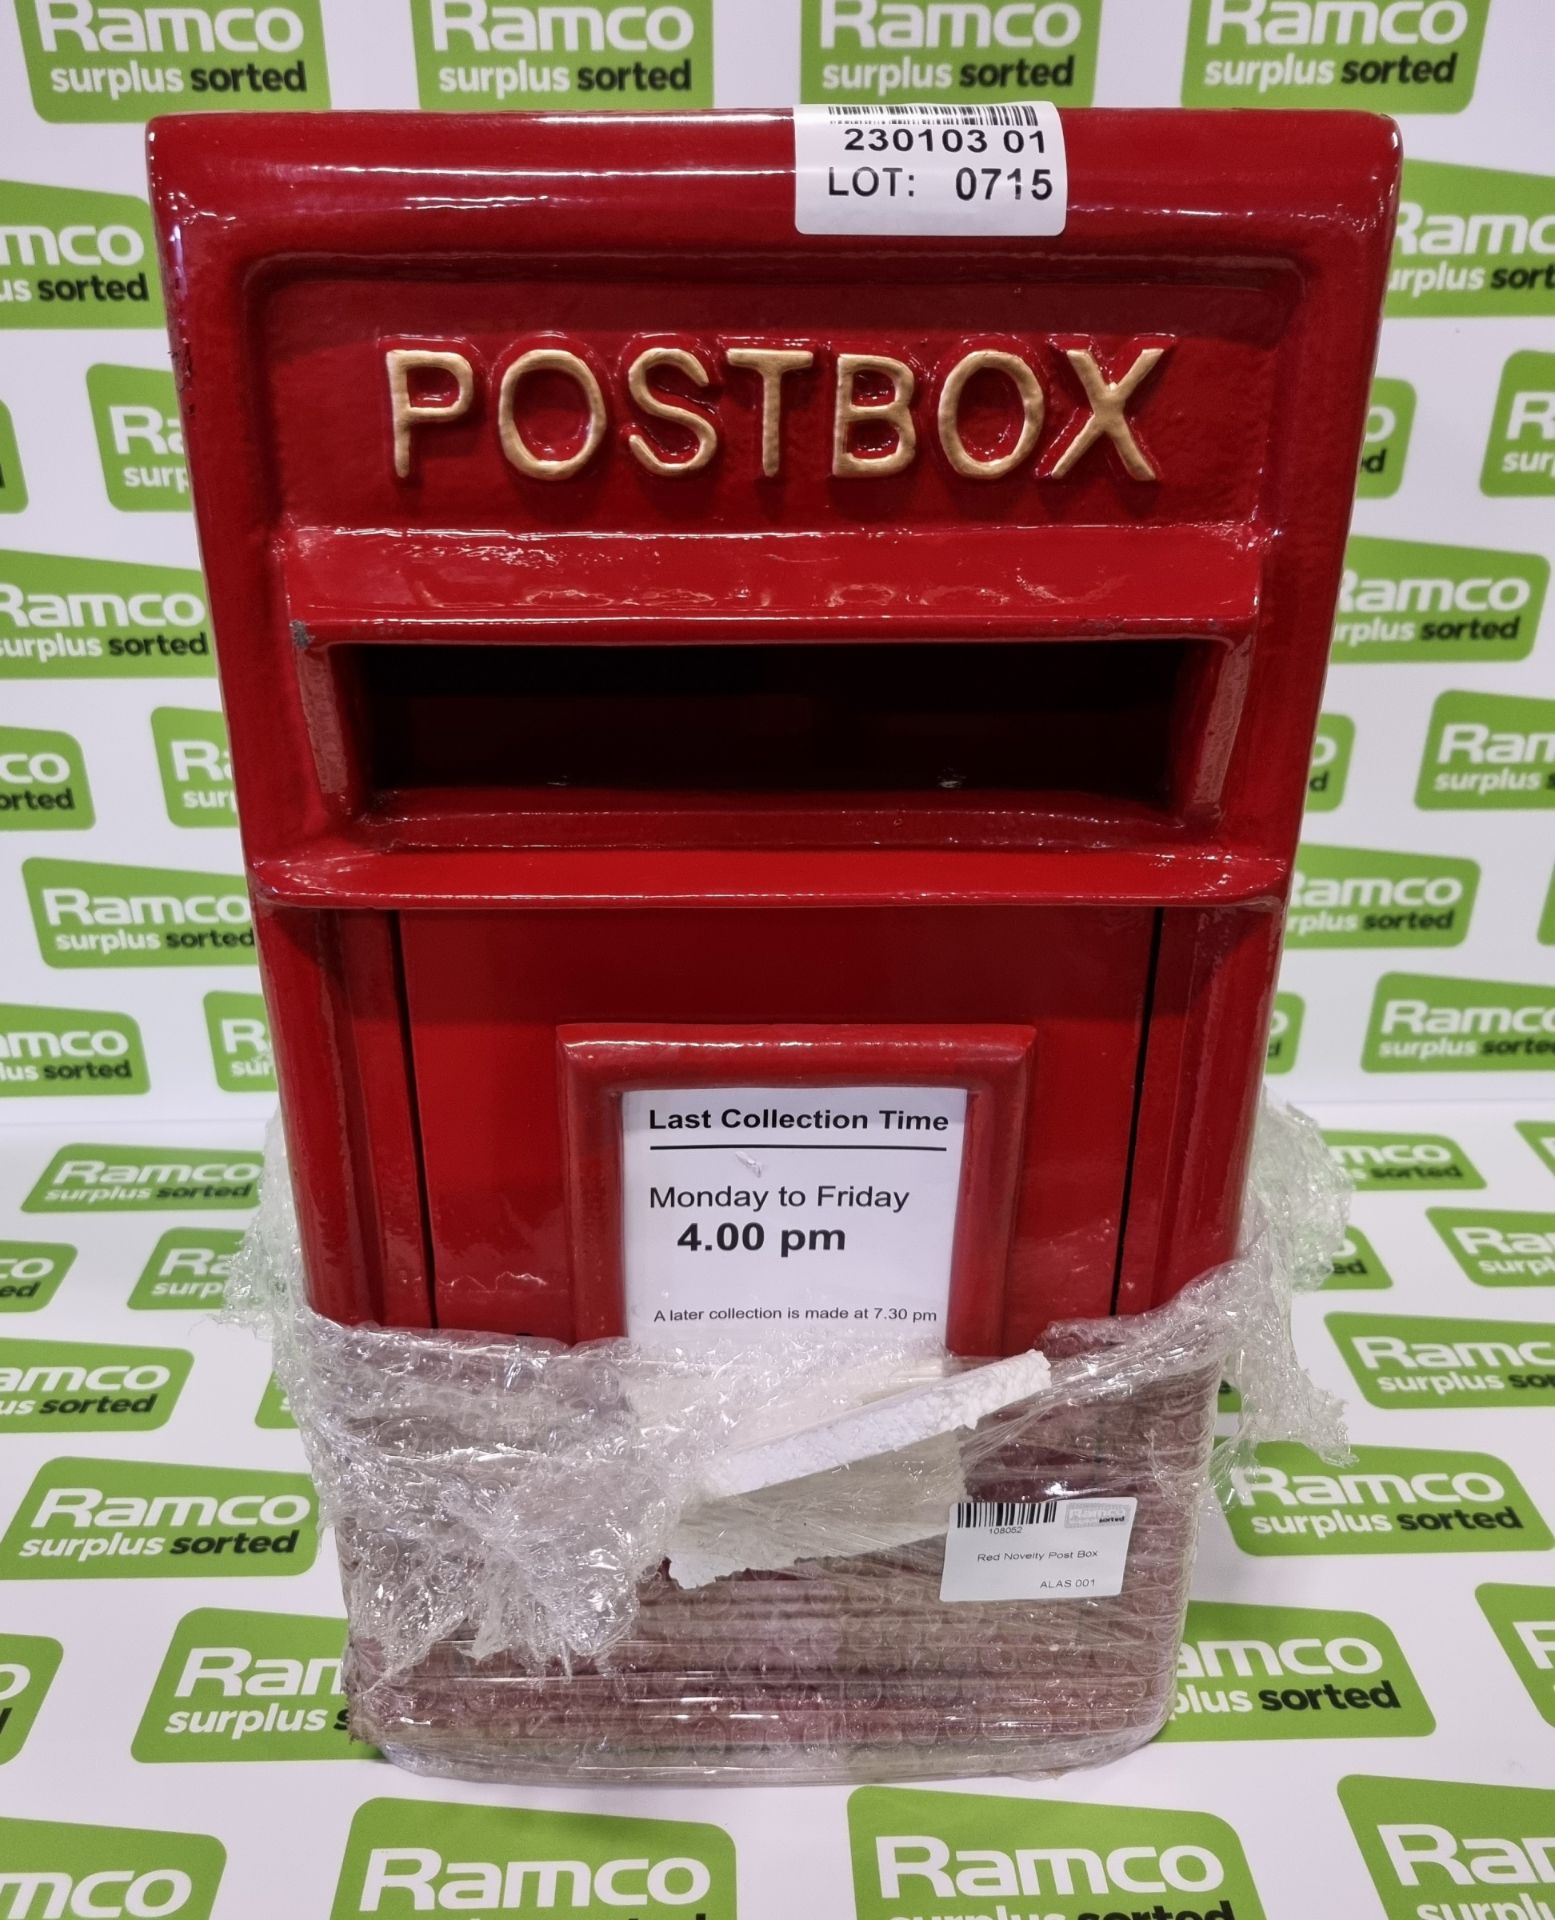 Red Novelty Post Box